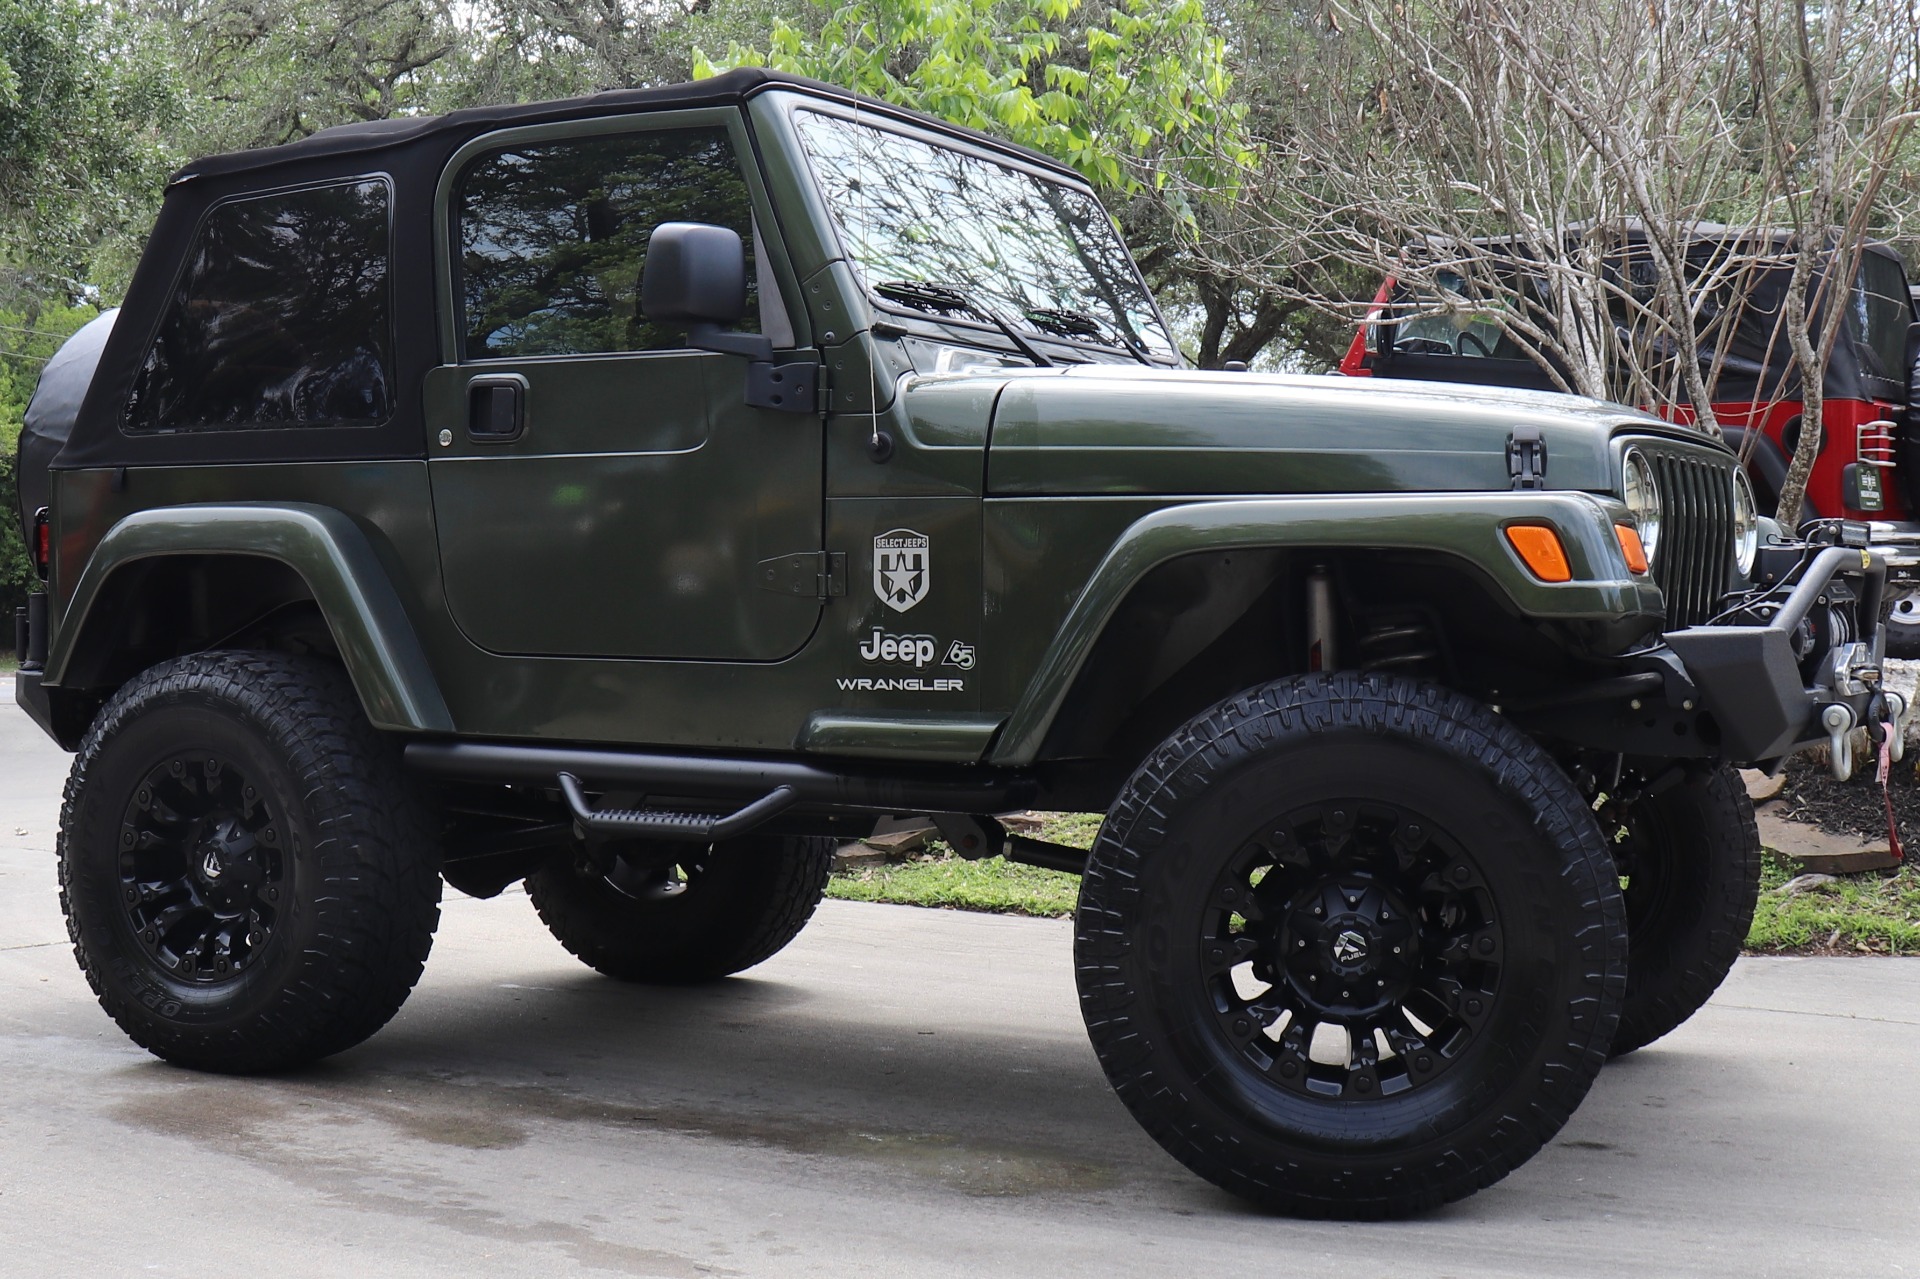 Used 2006 Jeep Wrangler X For Sale ($25,995) | Select Jeeps Inc. Stock  #757244